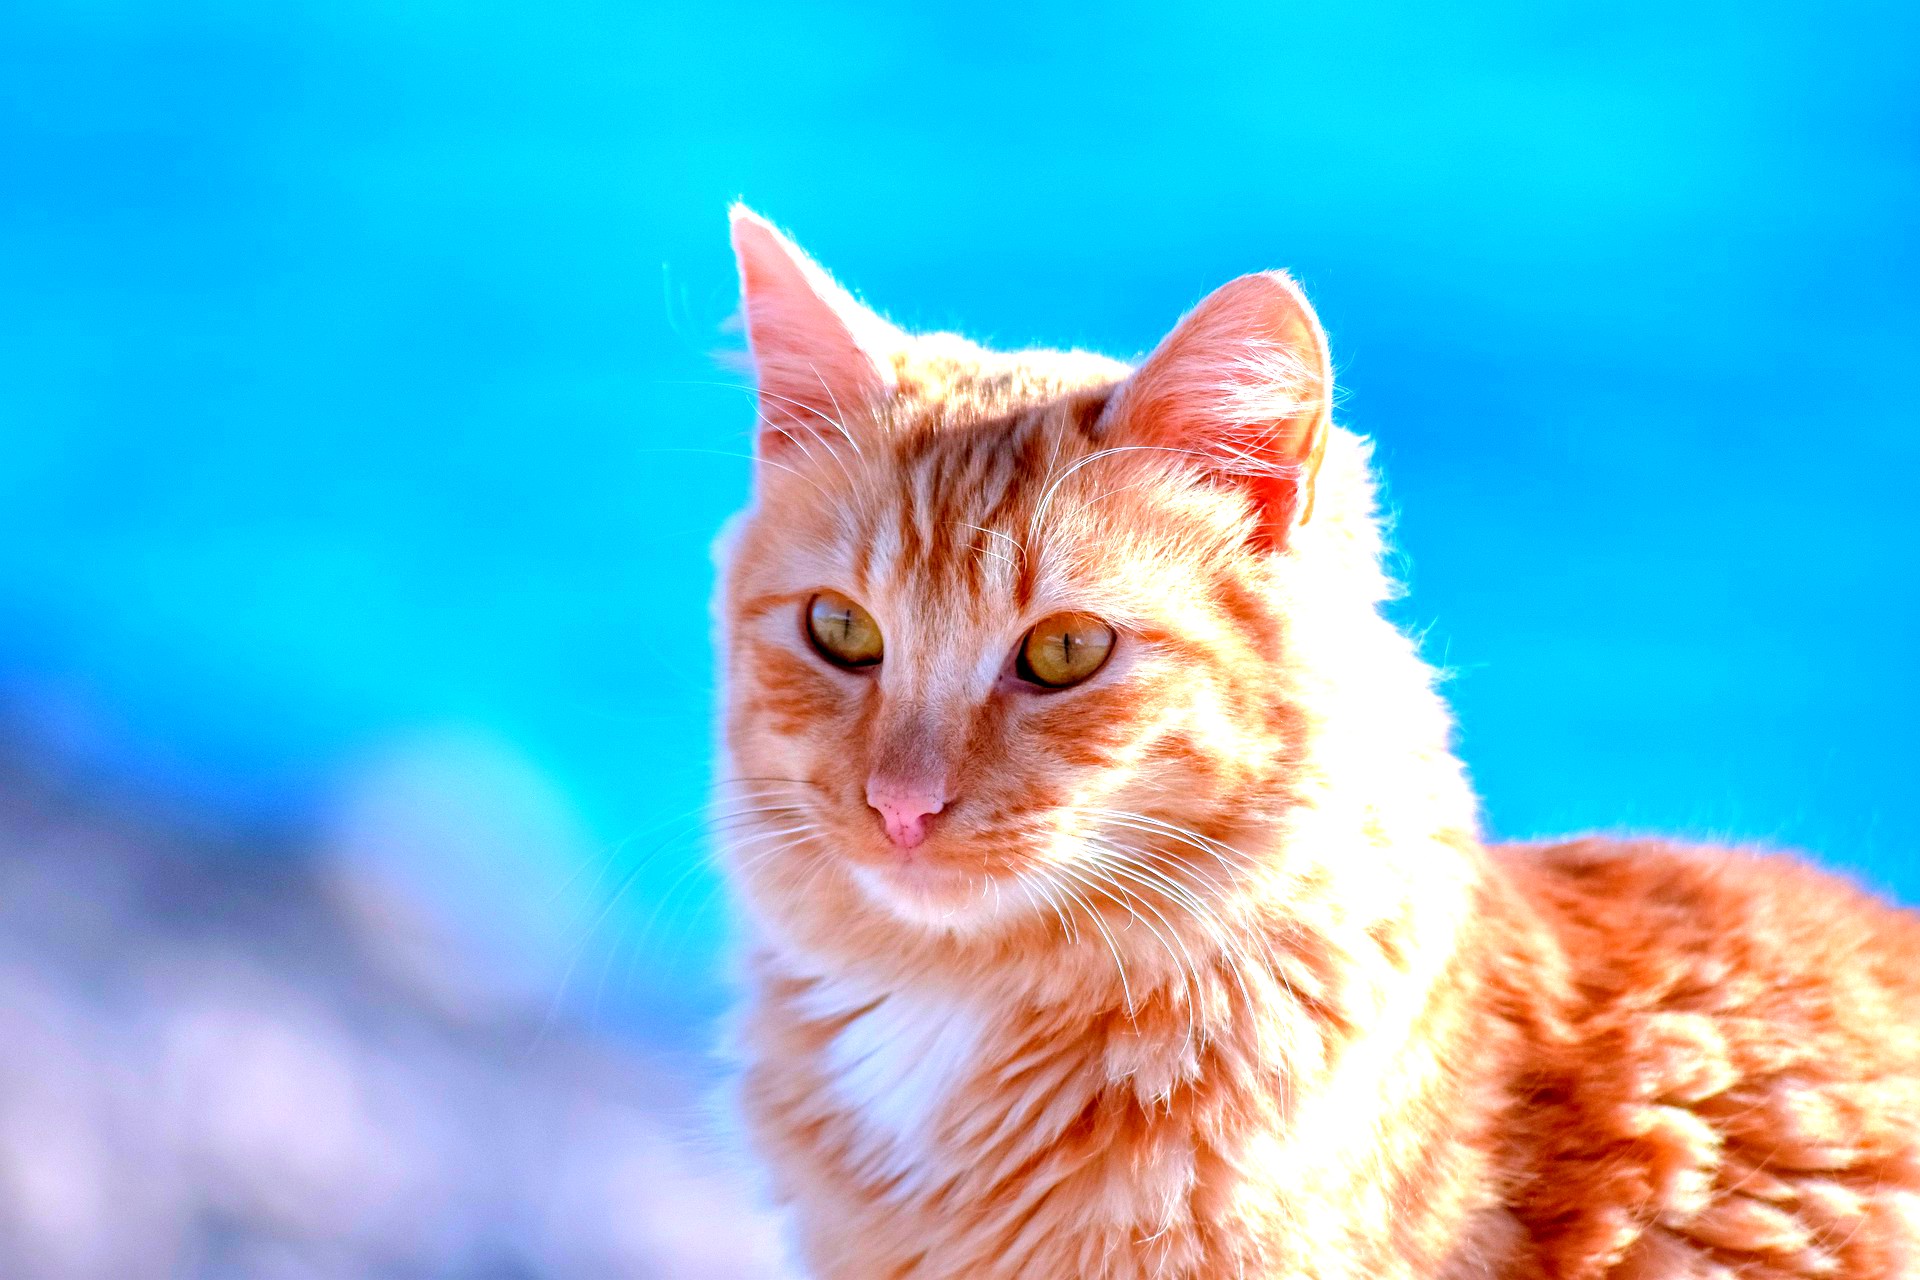 <img src="cat.jpg" alt="ginger cat how pets can boost your mental health"/> 